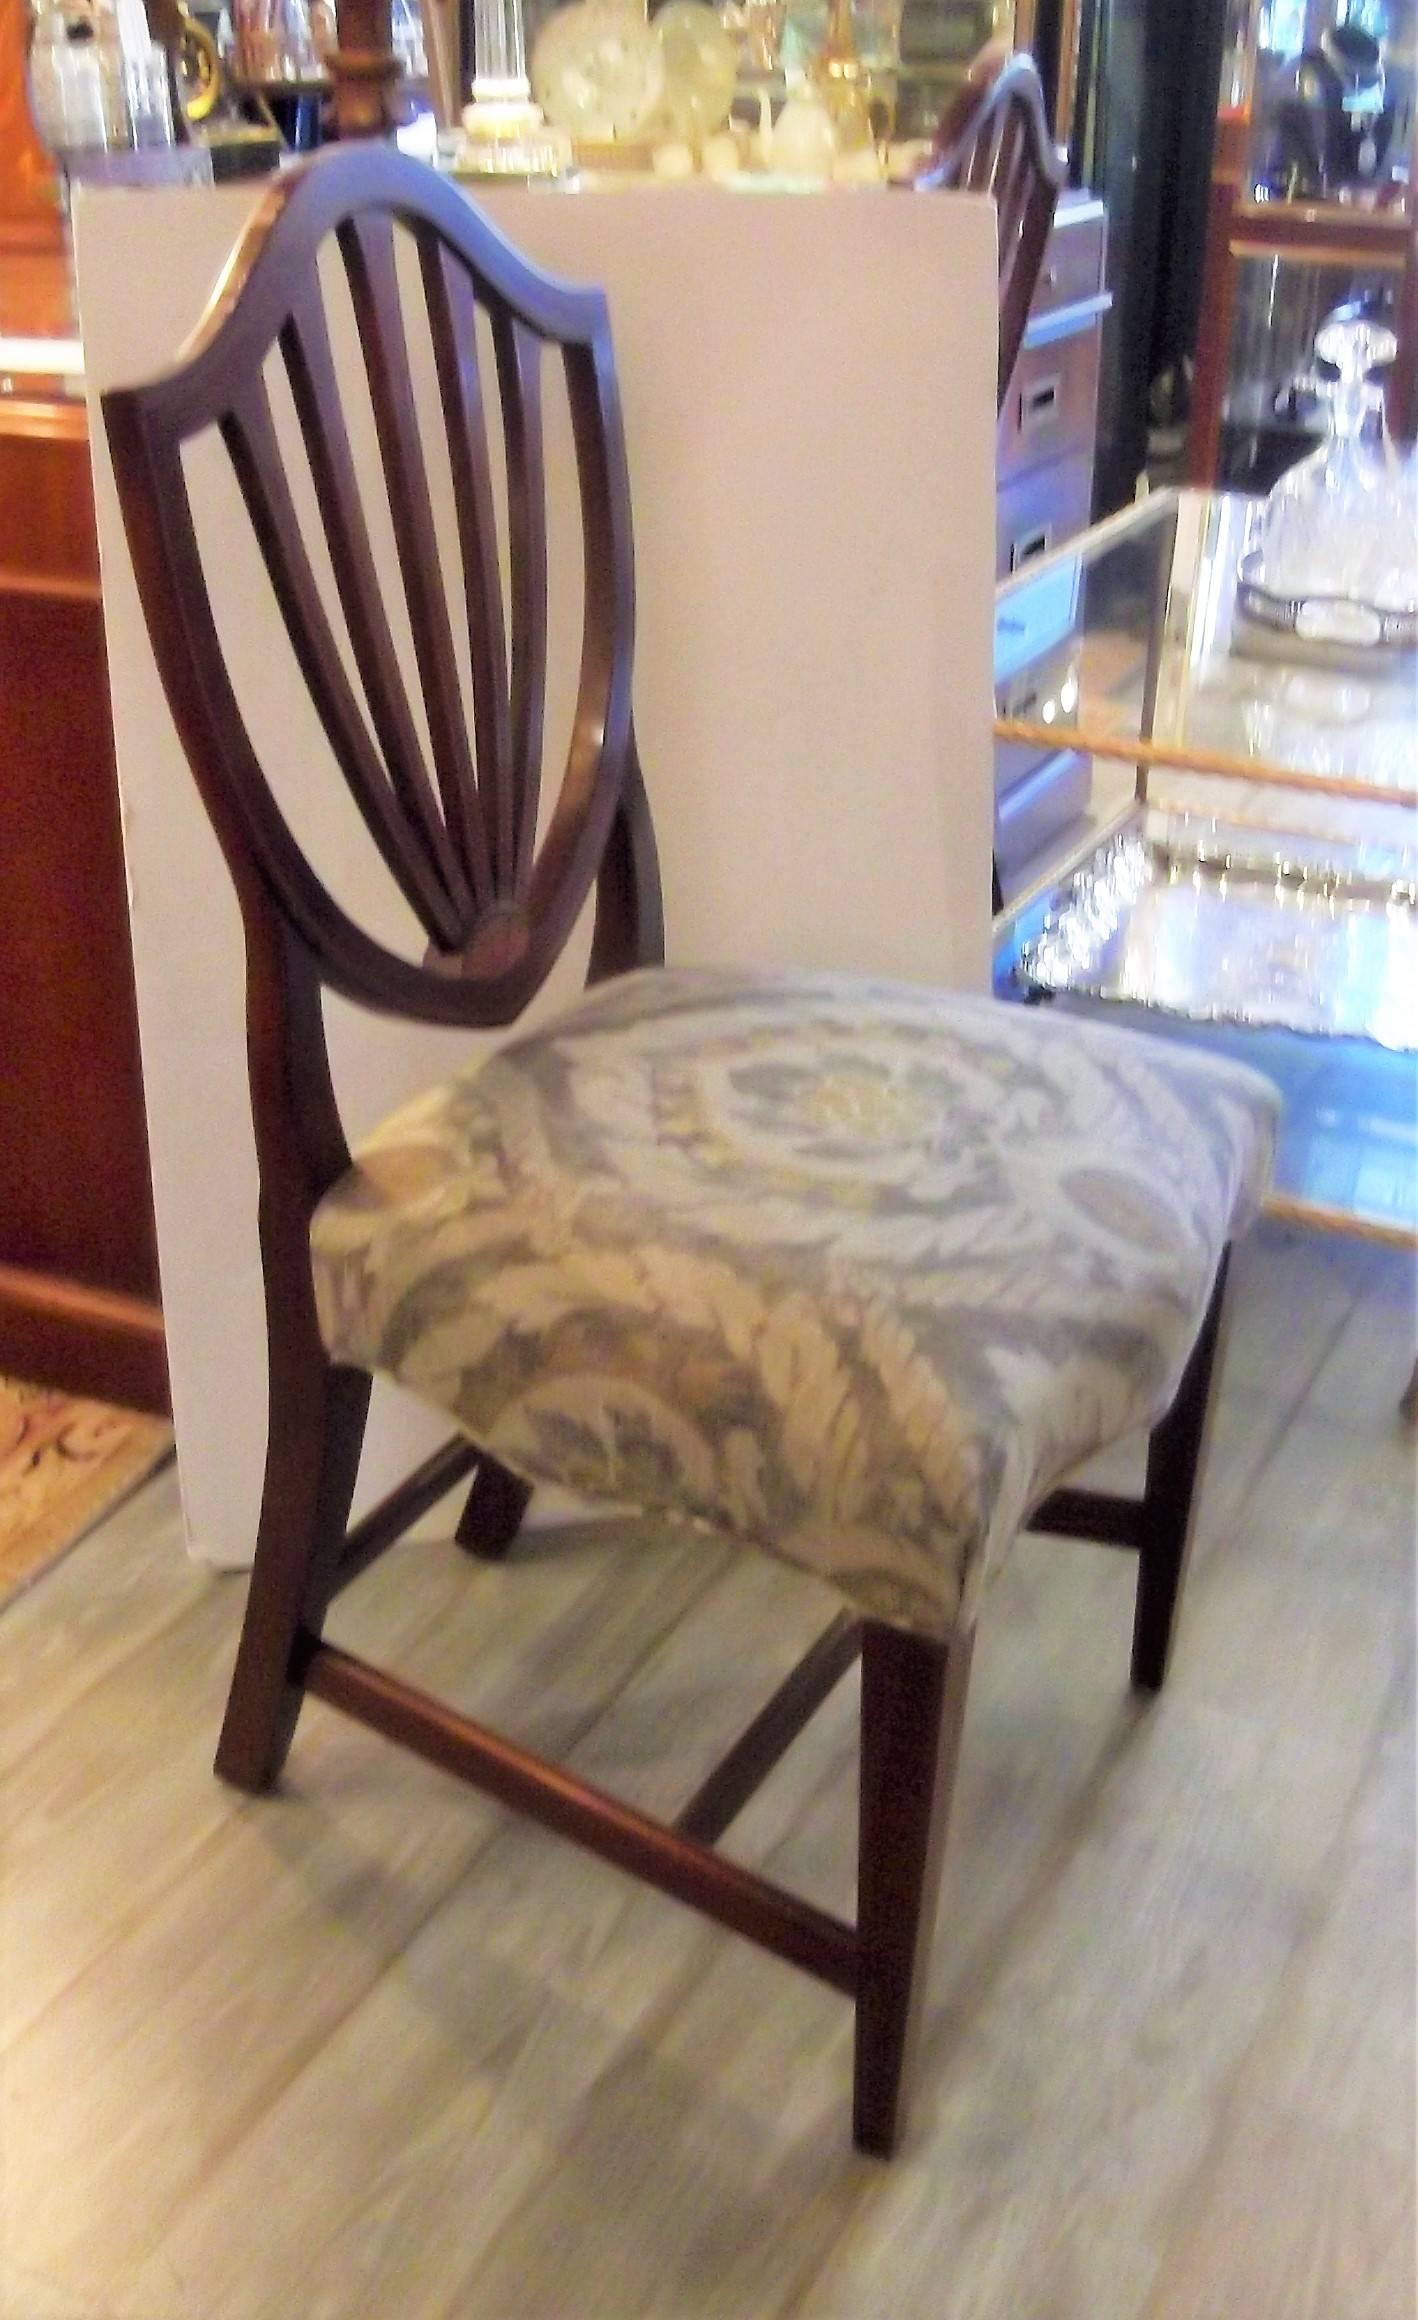 Mahogany with satinwood inlay shield back dining chairs. Classic Hepplewhite style with delicate inlay on the backs and front legs. New taupe, smokey gray and yellow fabric for the seats in a traditional pattern.